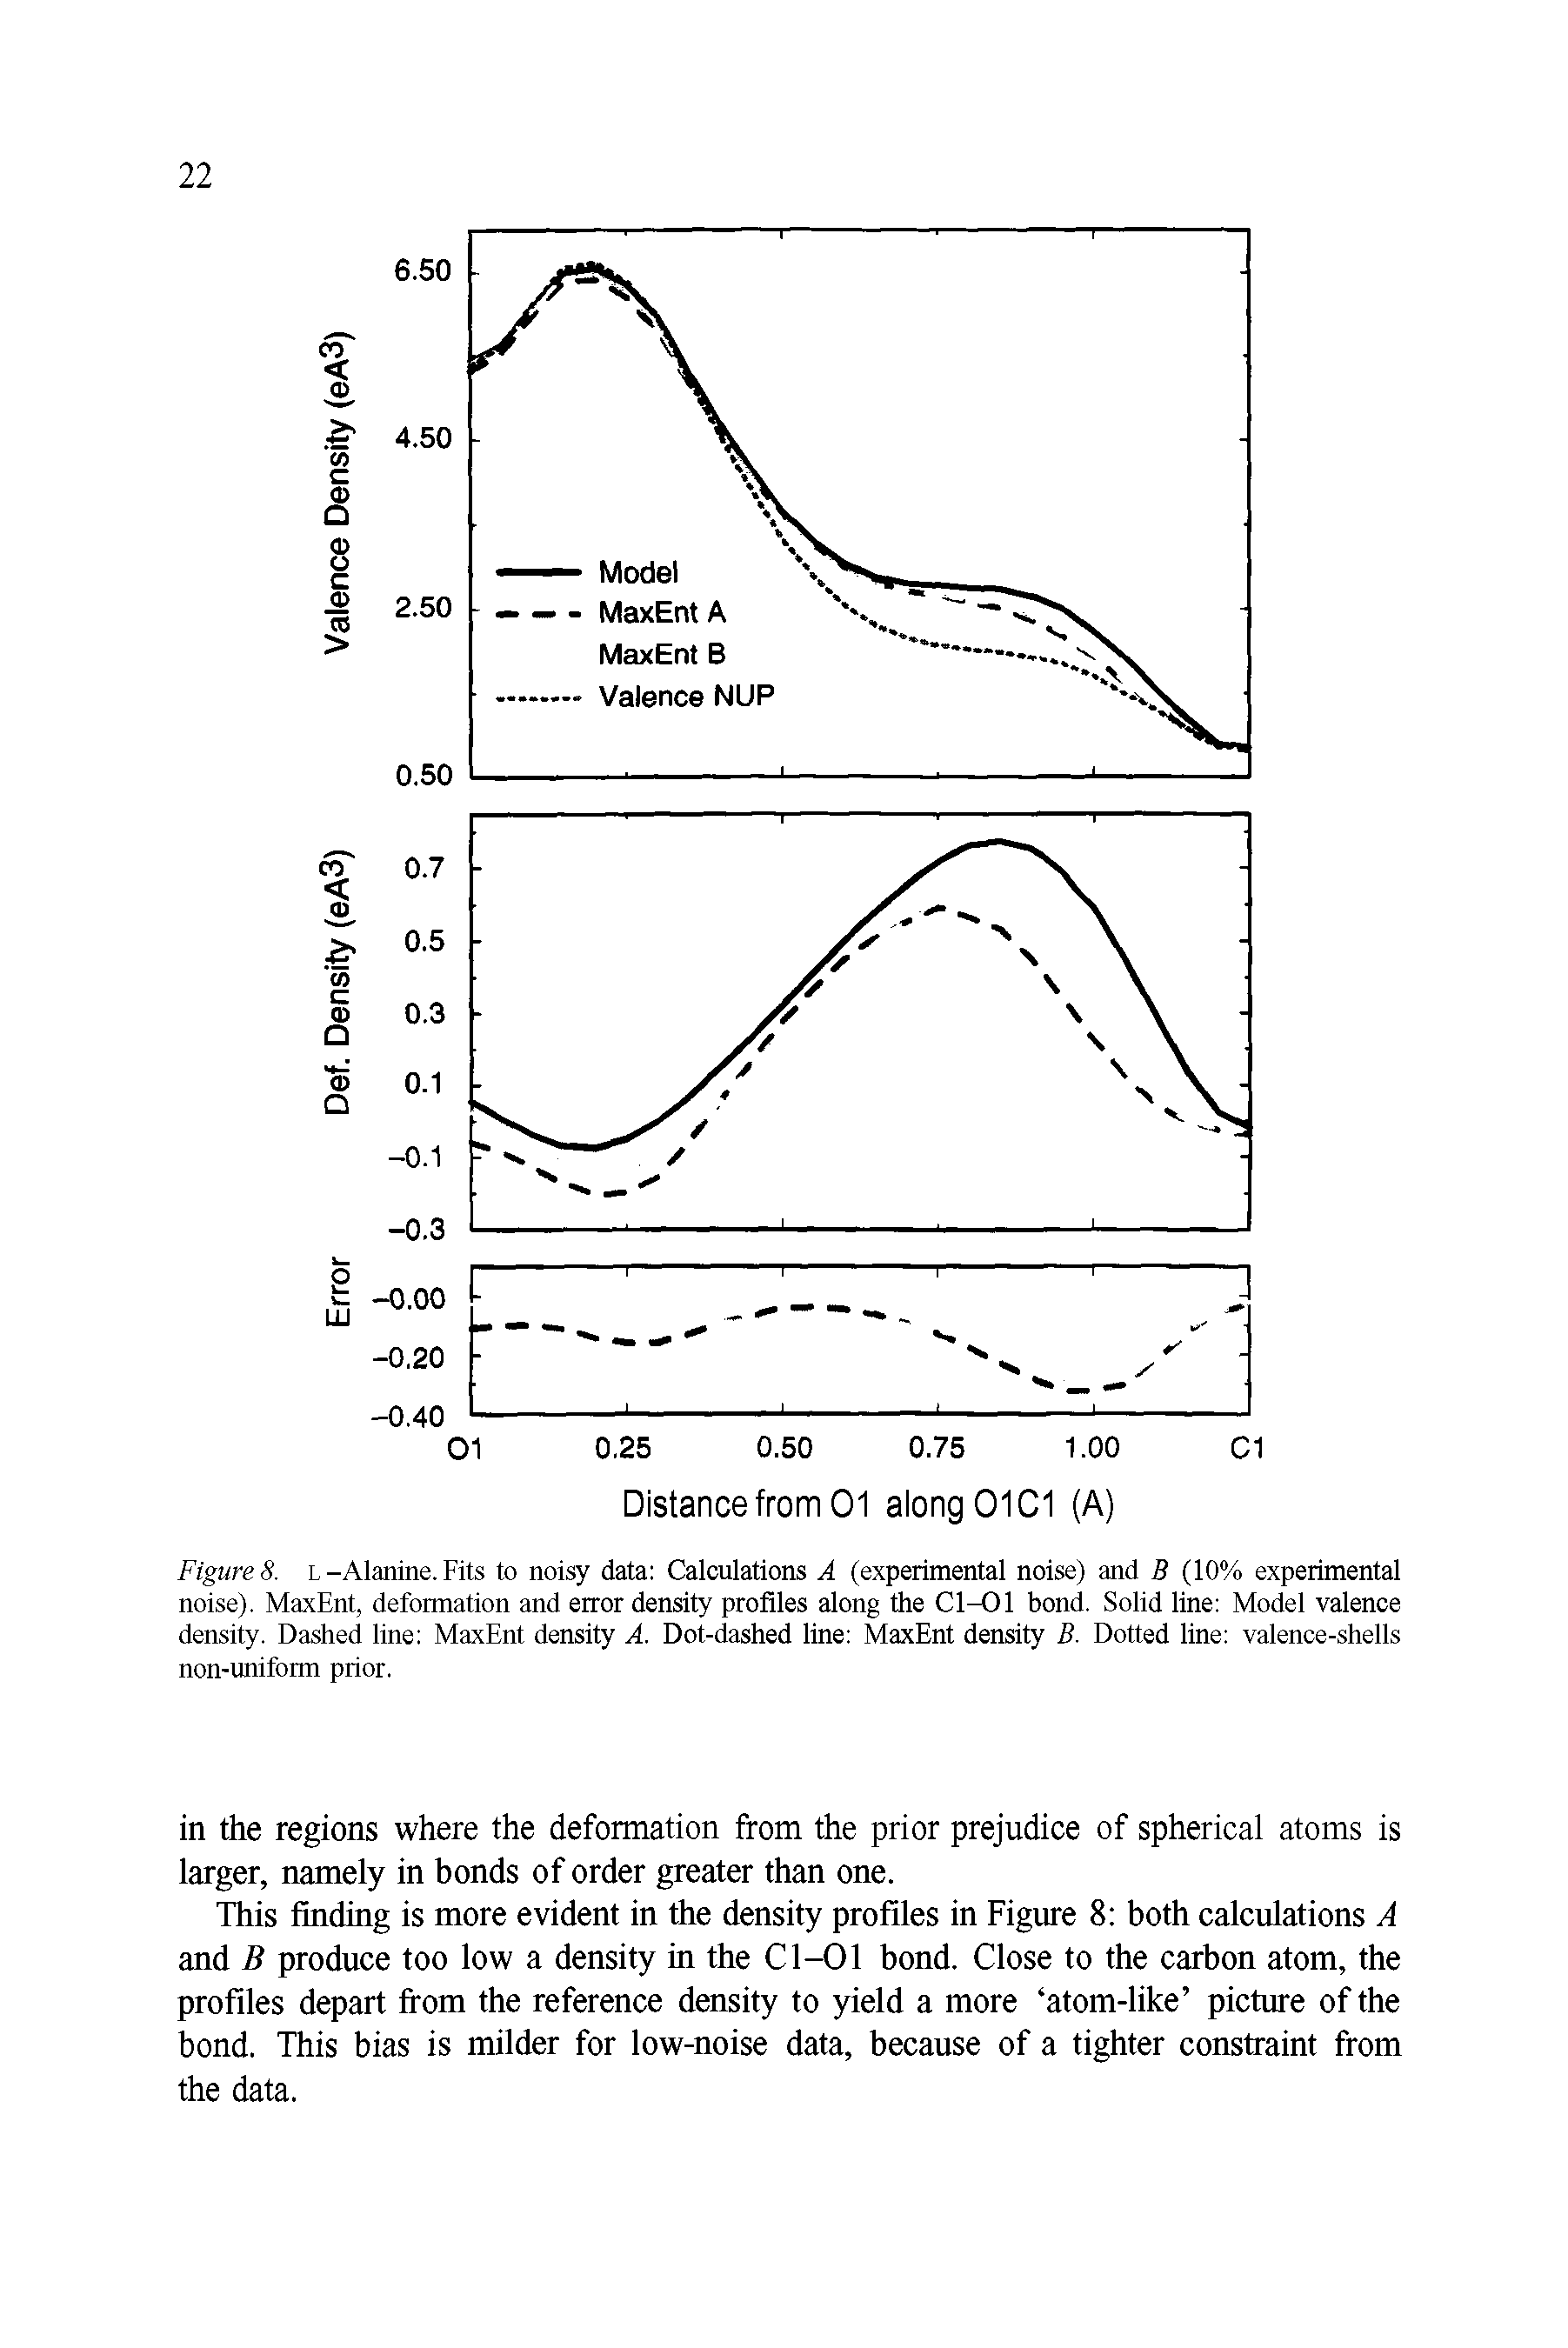 Figures, l-Alanine.Fits to noisy data Calculations A (experimental noise) and B (10% experimental noise). MaxEnt, deformation and error density profiles along the Cl-01 bond. Solid line Model valence density. Dashed line MaxEnt density A. Dot-dashed line MaxEnt density B. Dotted line valence-shells non-uniform prior.